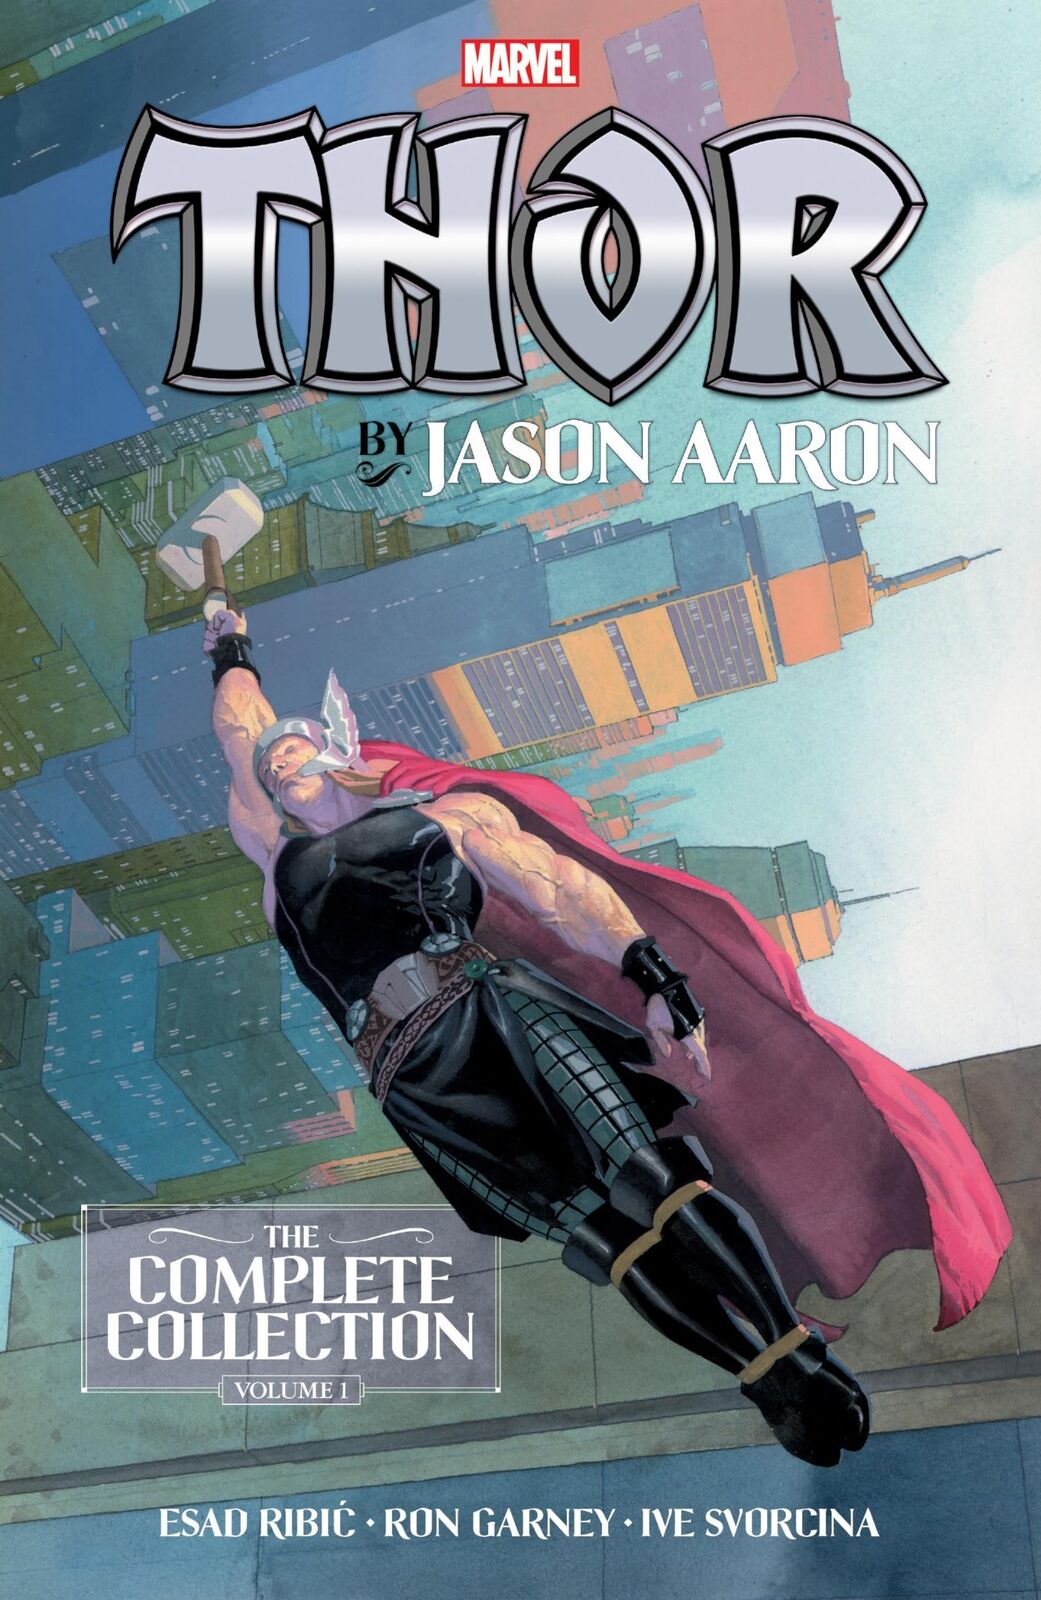 THOR THE COMPLETE COLLECTION Volume 1 JASON AARON TPB Marvel Universe